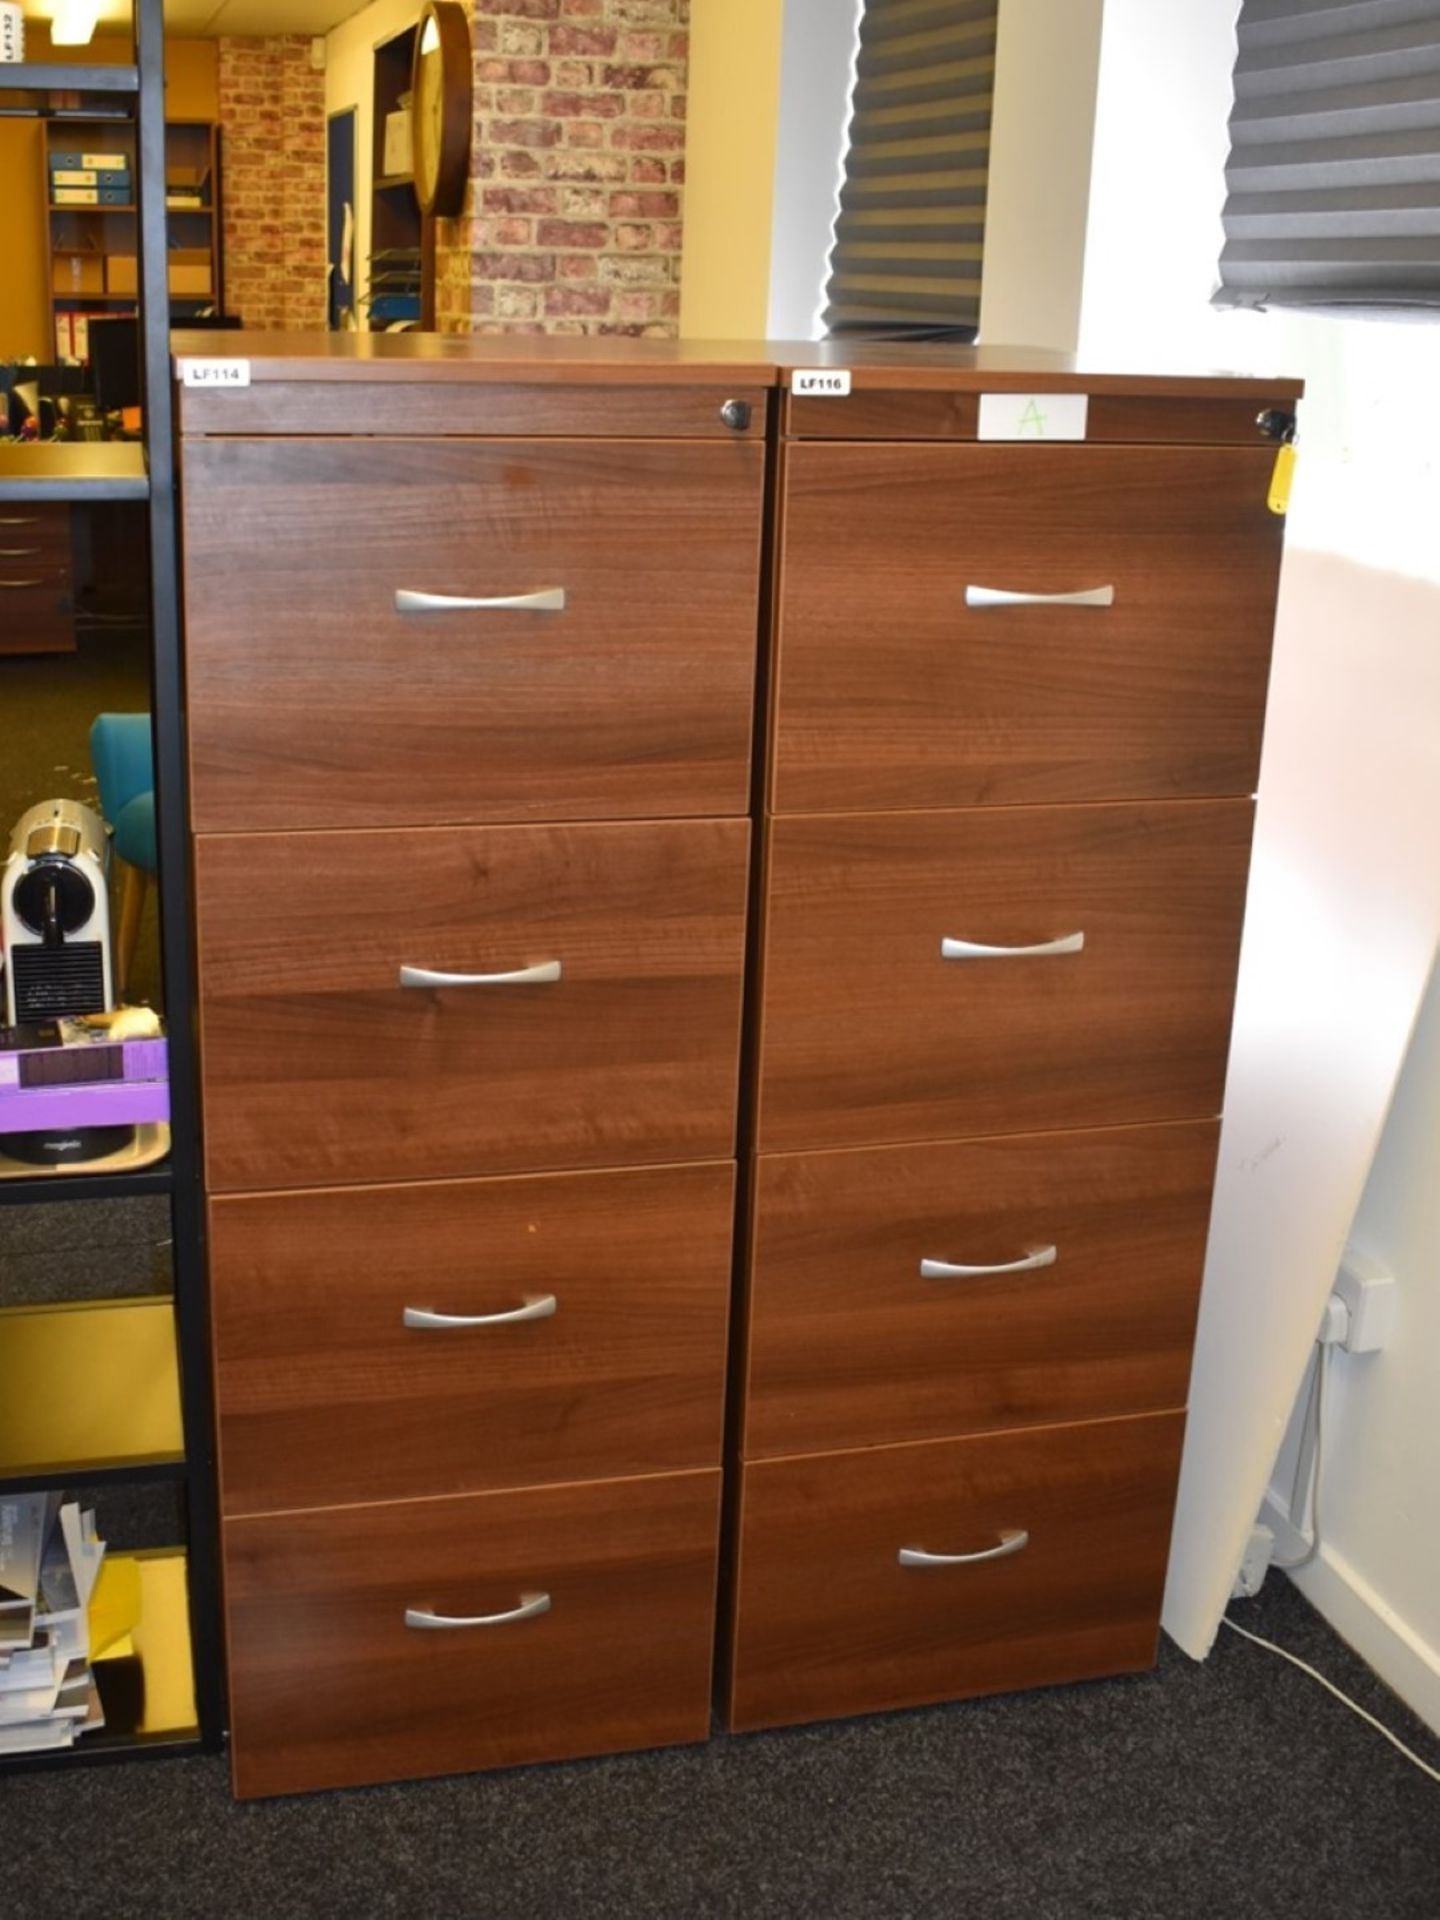 1 x Four Drawer Filing Cabinet With Walnut Finish - Keys Included - H136 x W48 x D60 cm - Image 4 of 4